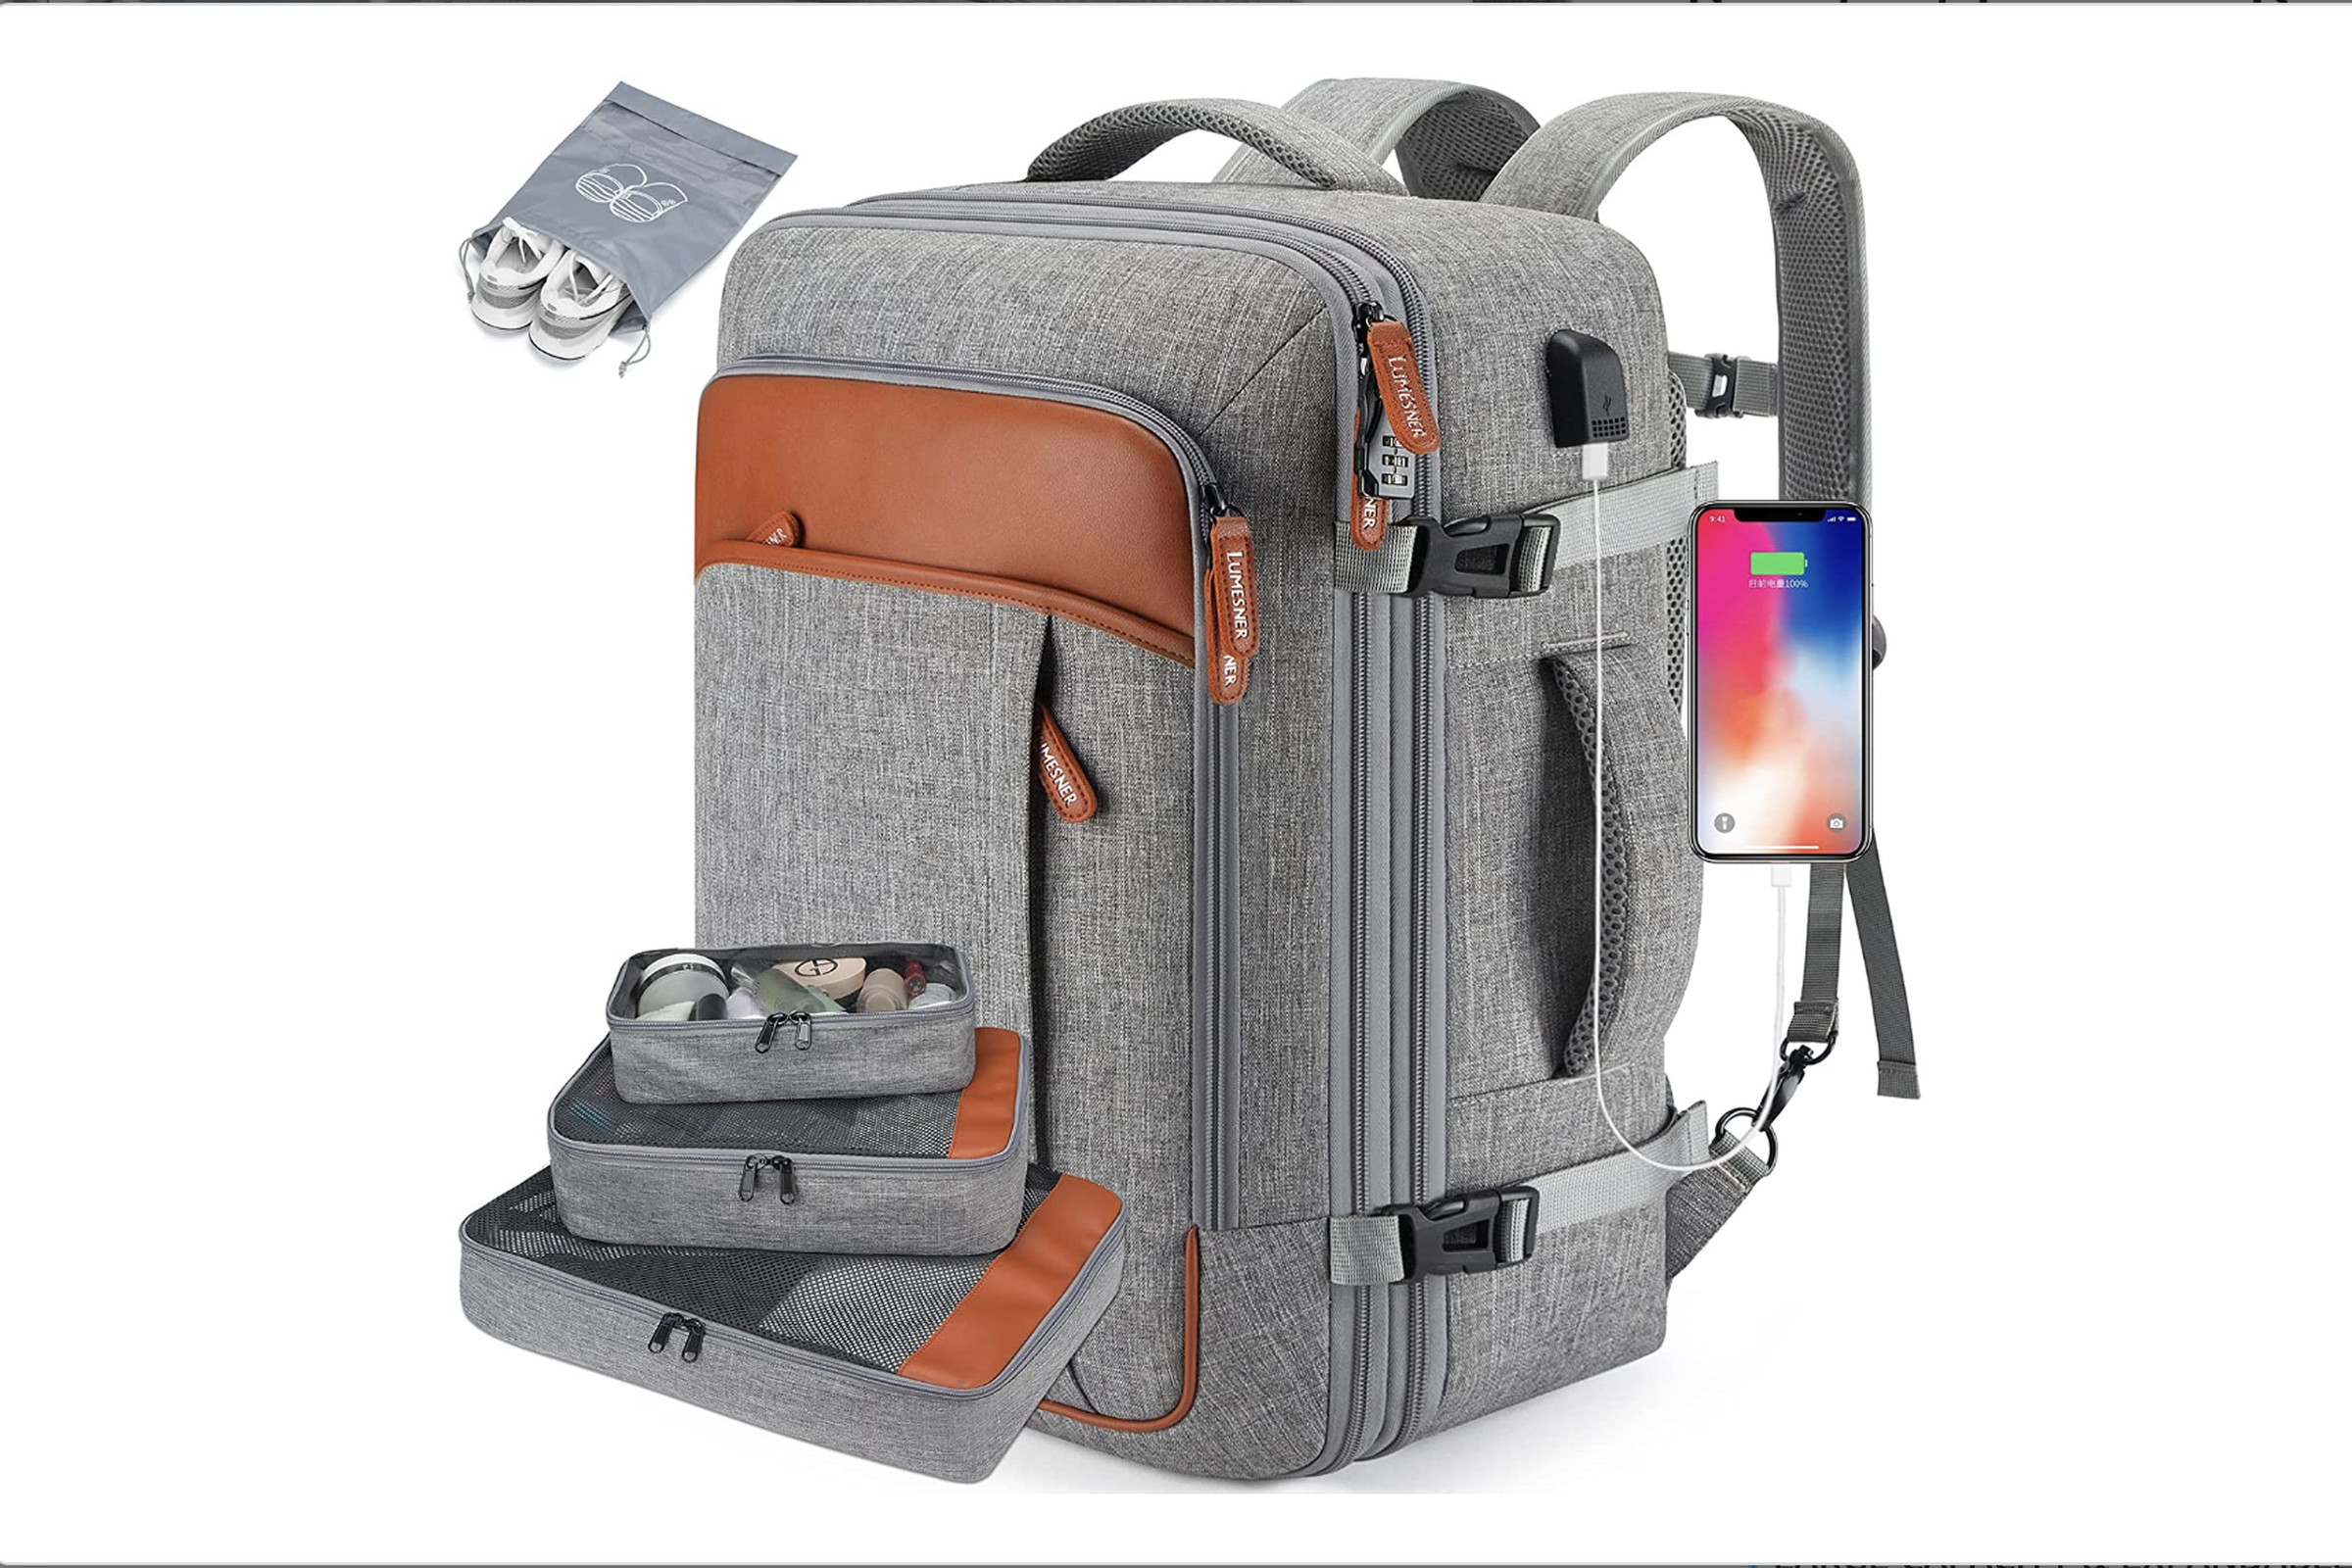 Gray backpack with brown leather-like accents.